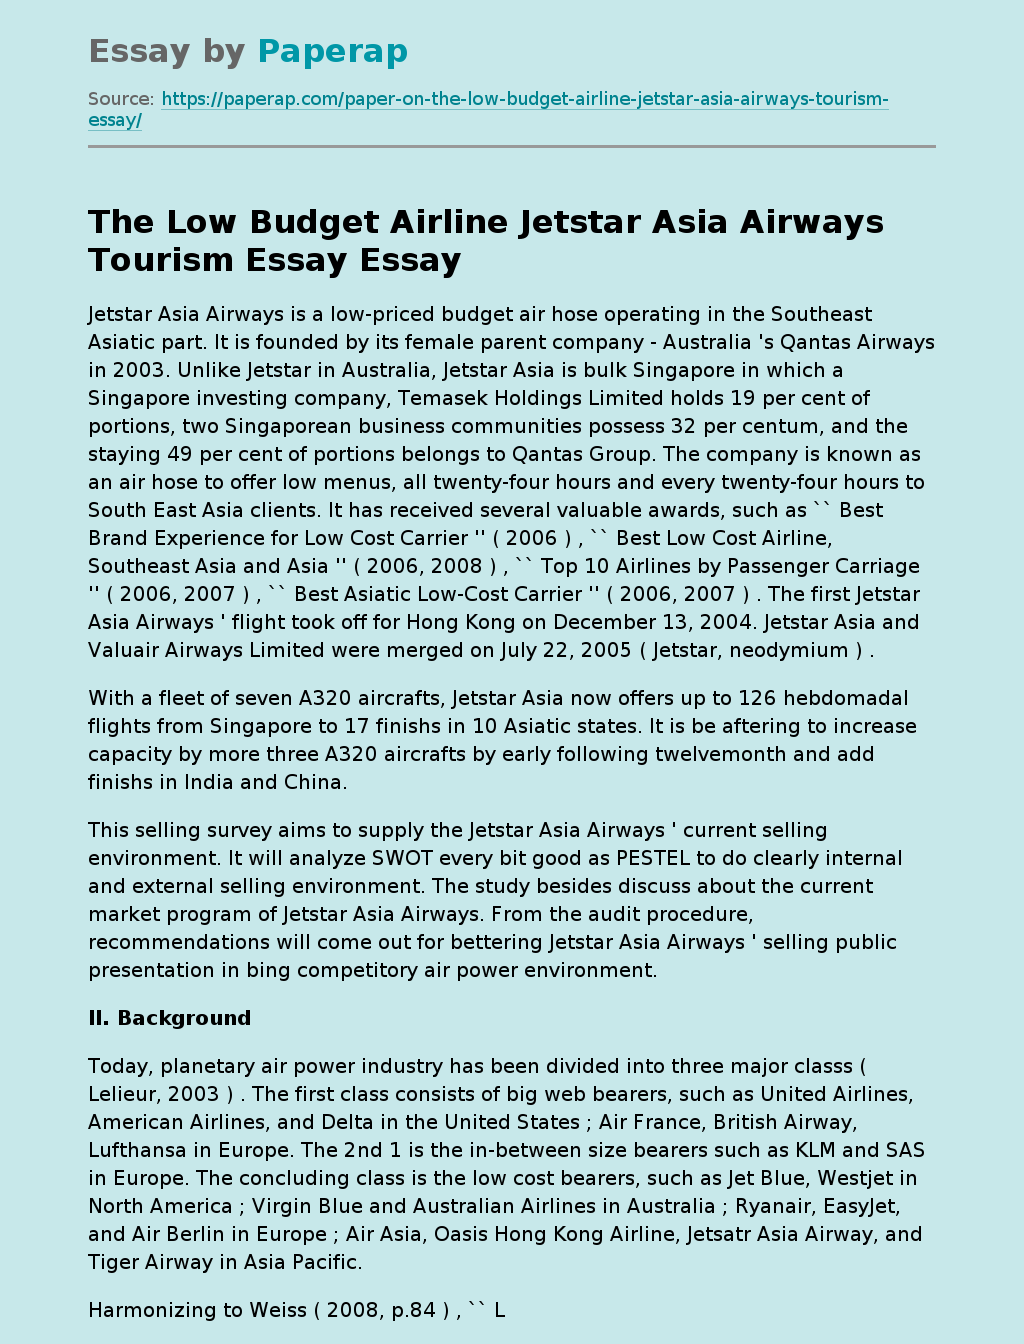 The Low Budget Airline Jetstar Essay